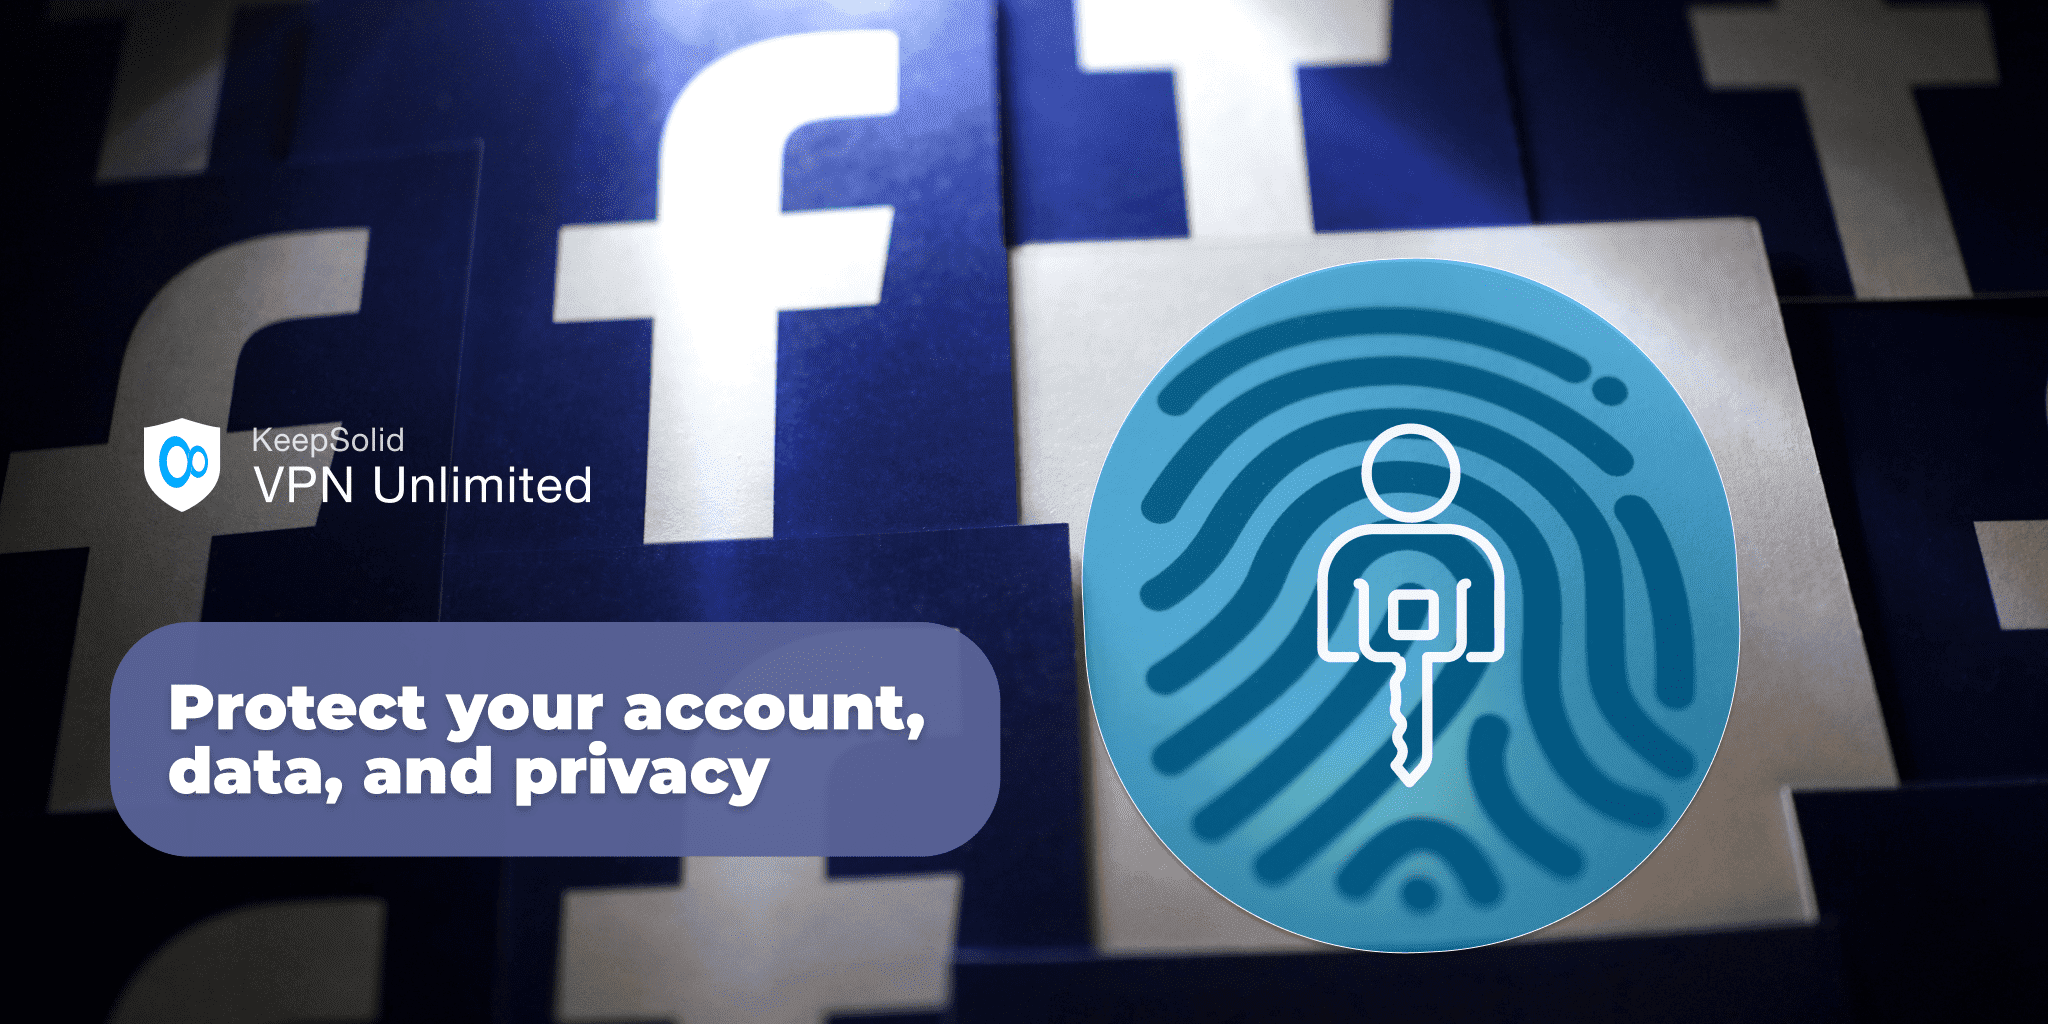 Facebook security and privacy issues, how to protect your account from future hacks